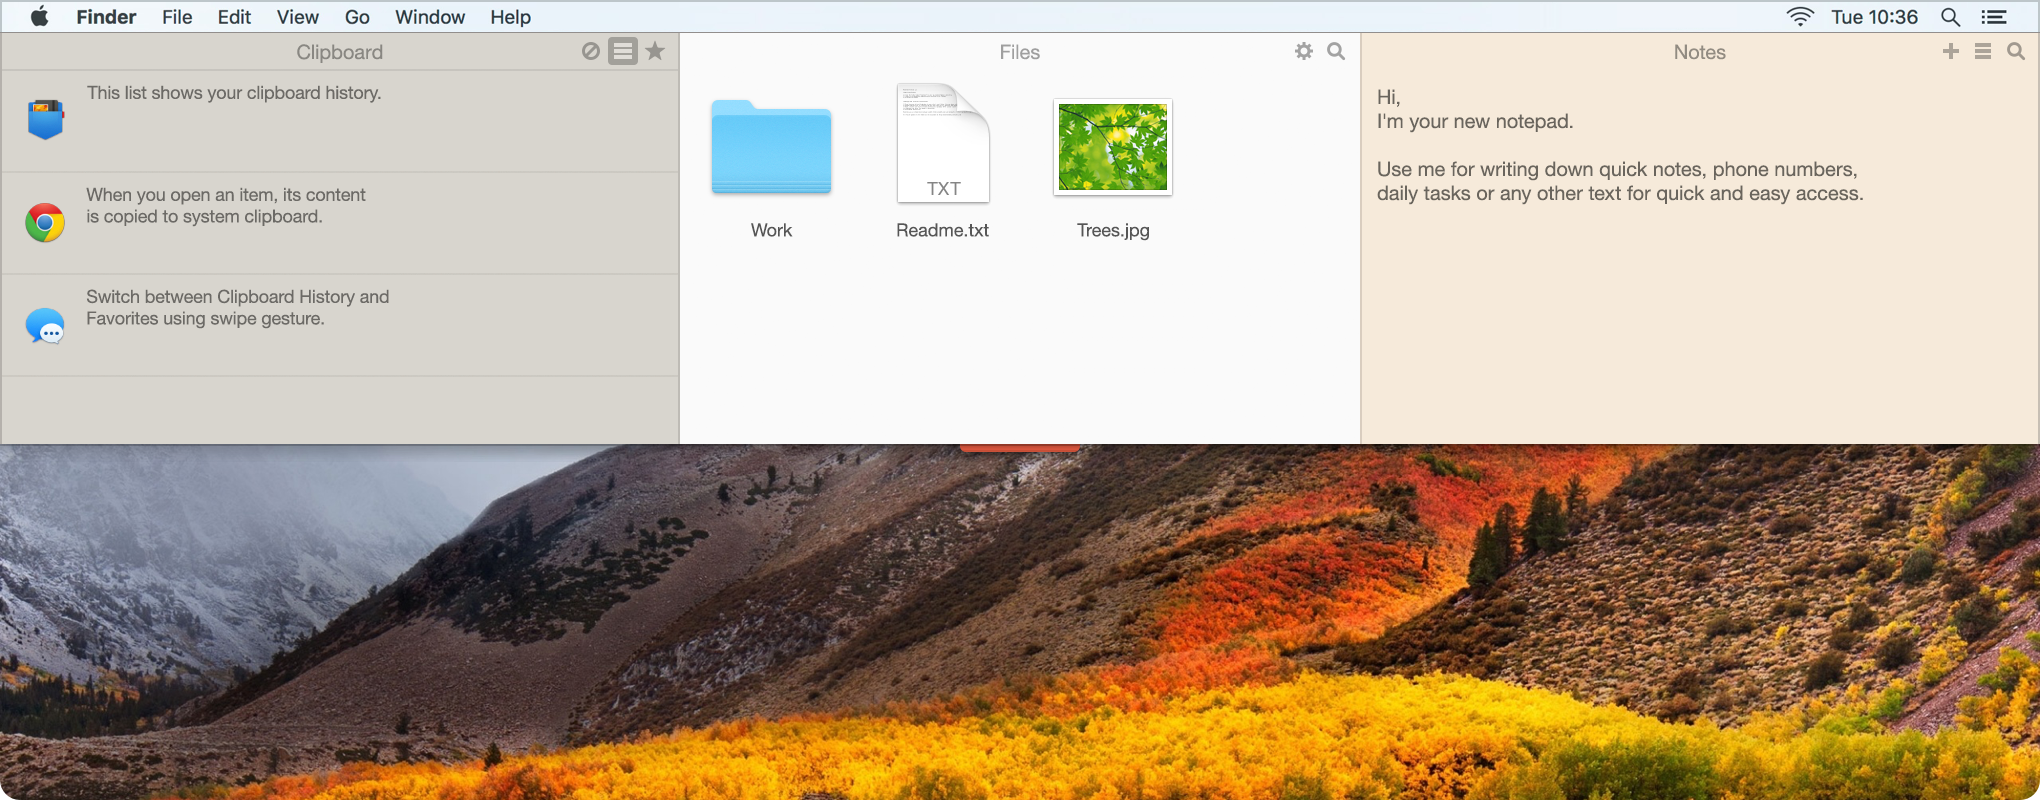 Unclutter - Files, Notes and Clipboard manager. Will help you keep the Desktop clean.